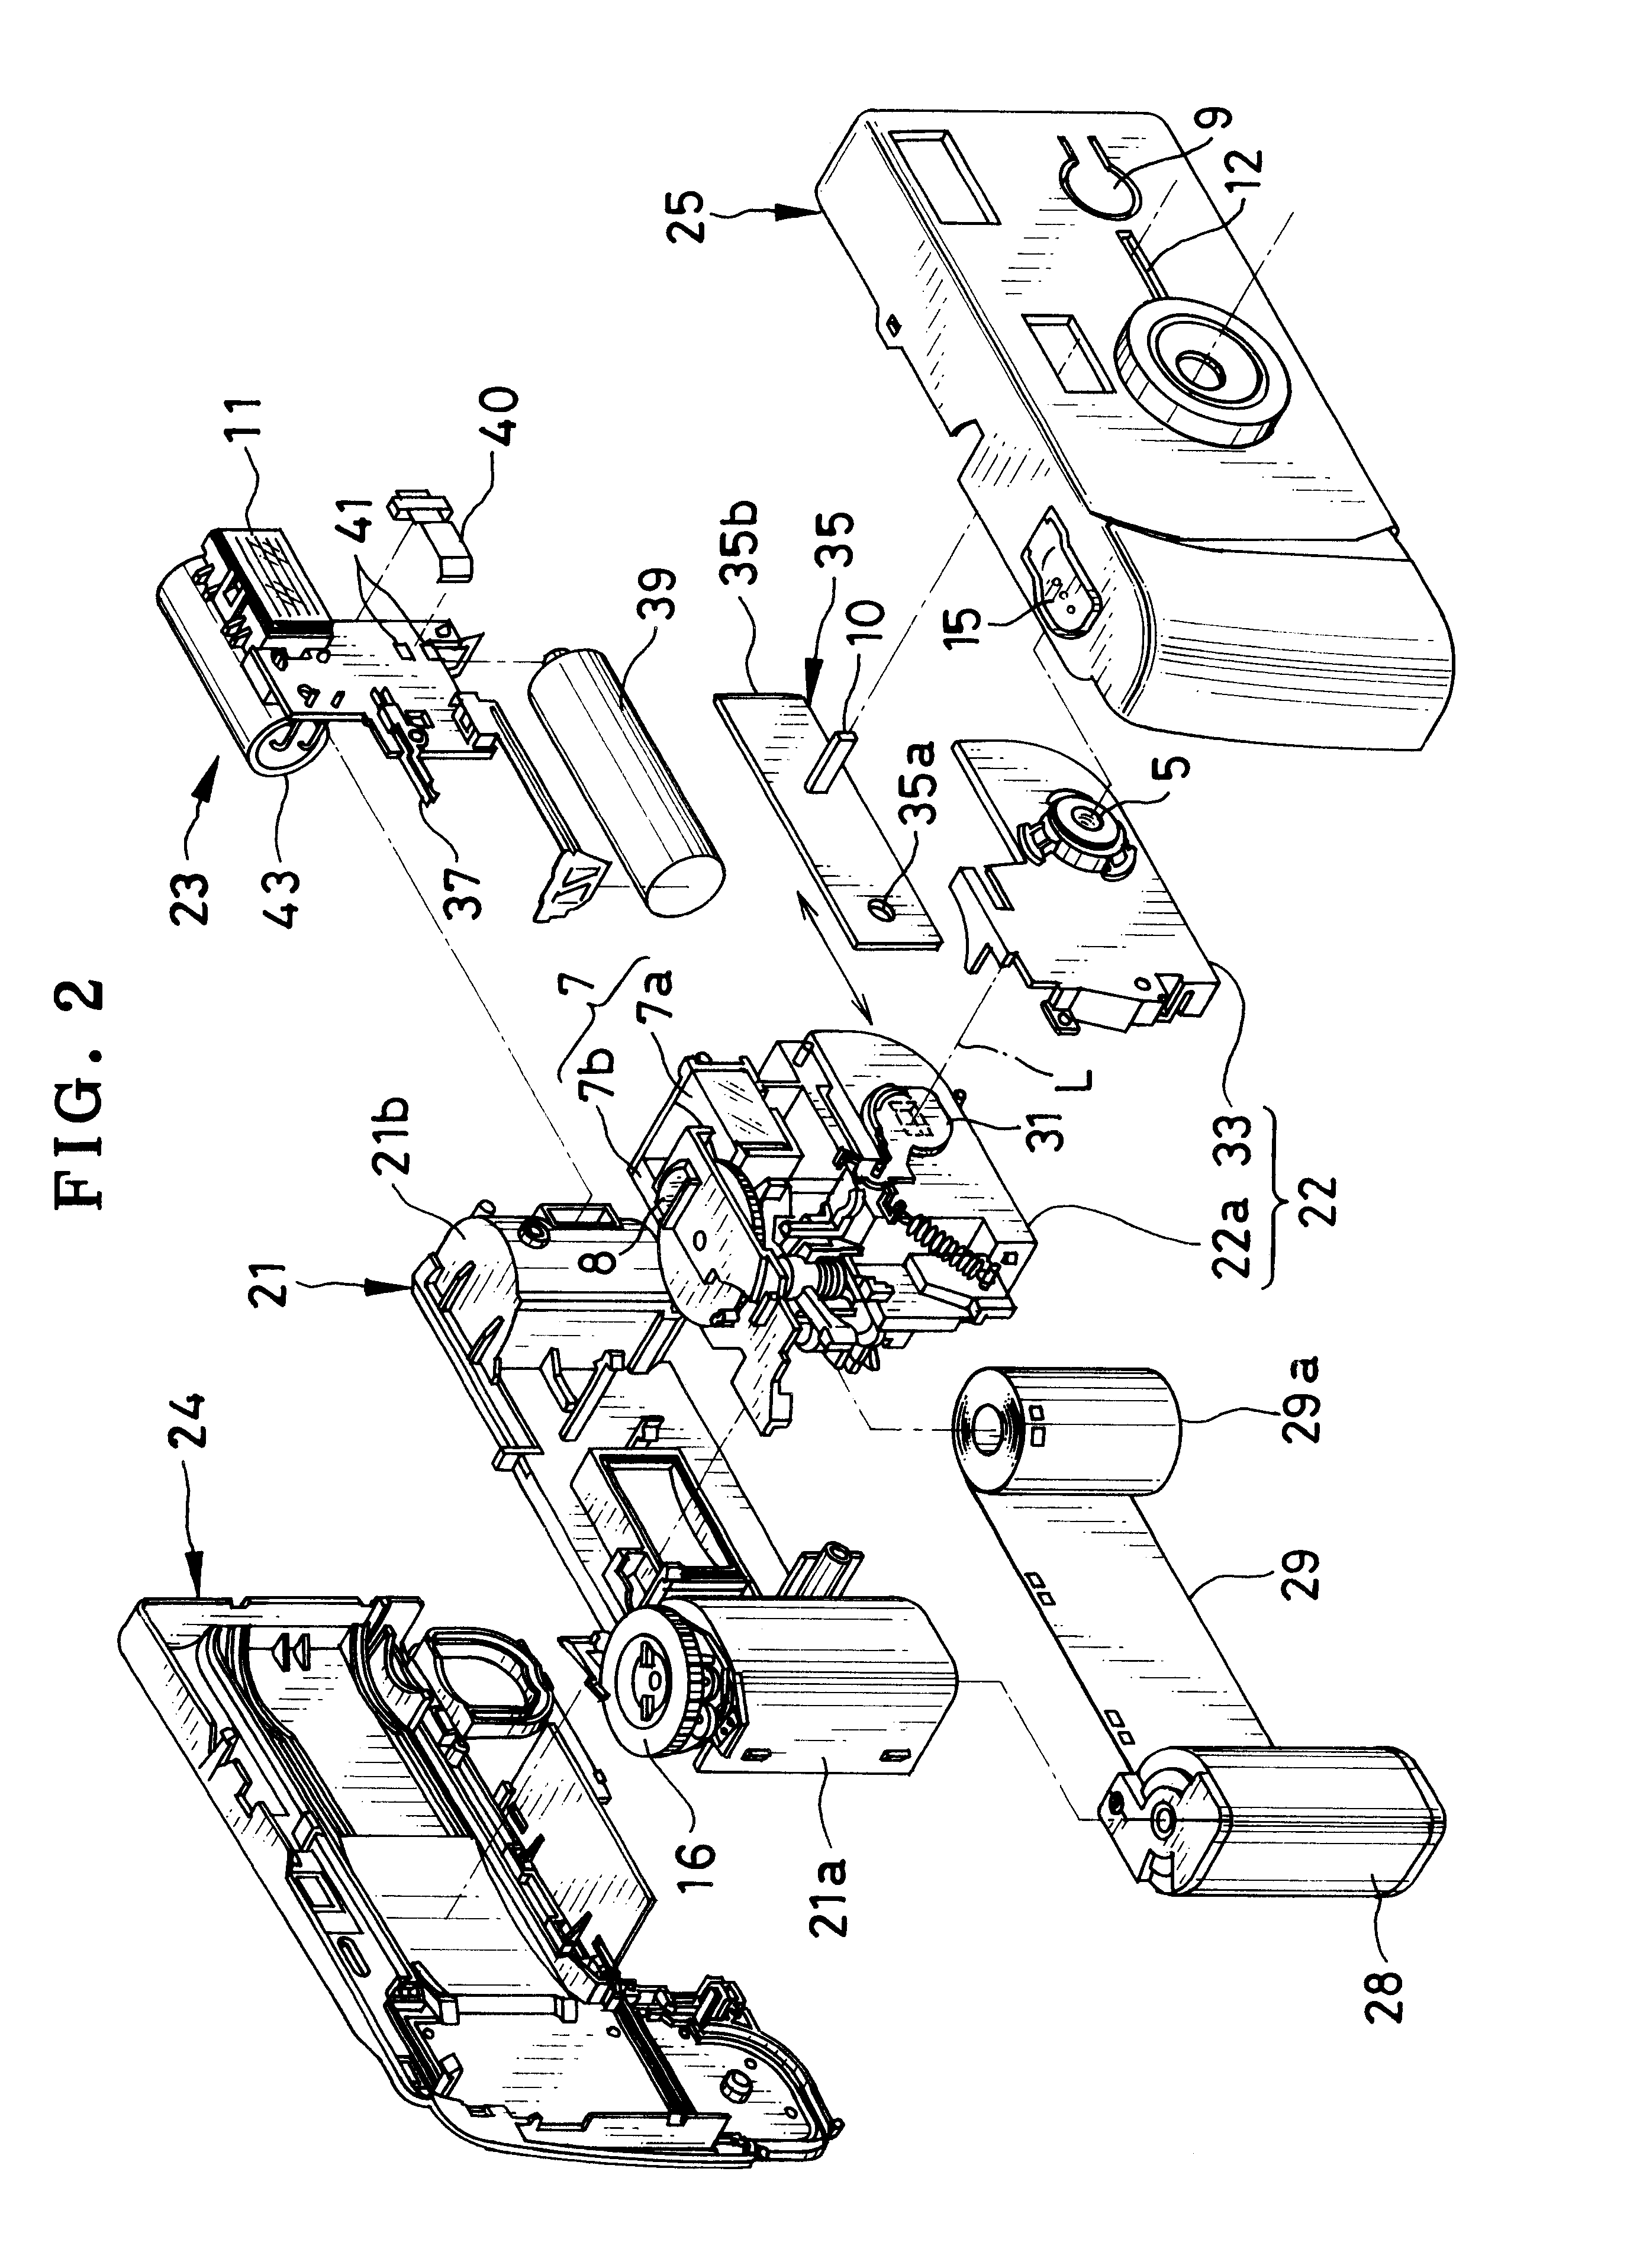 Lens-fitted photo film unit with flash device